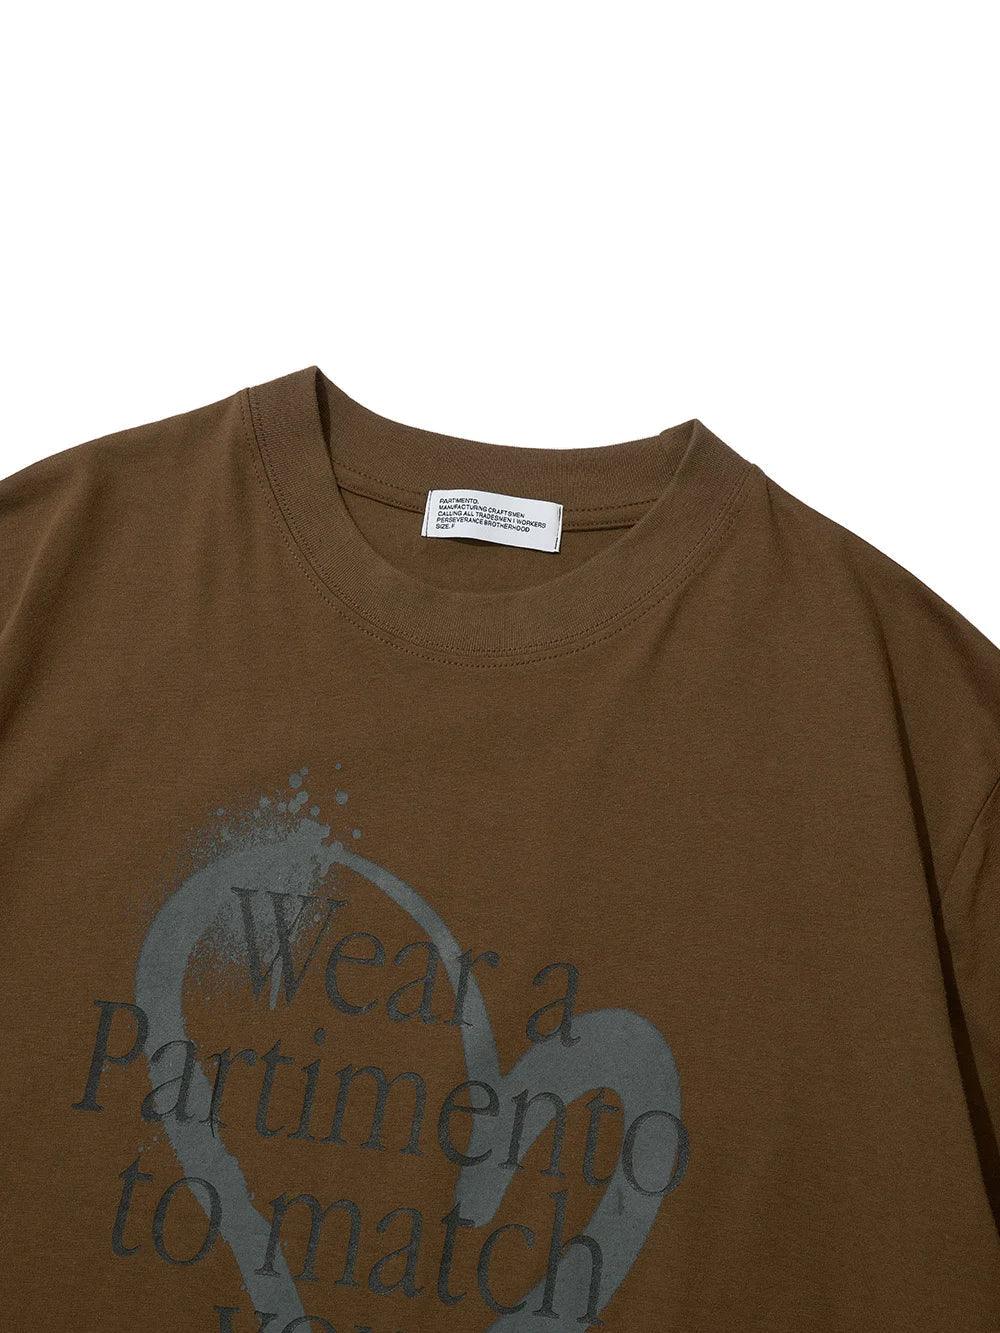 Partimento Heart Painting Layered LS T-shirt - Brown - One